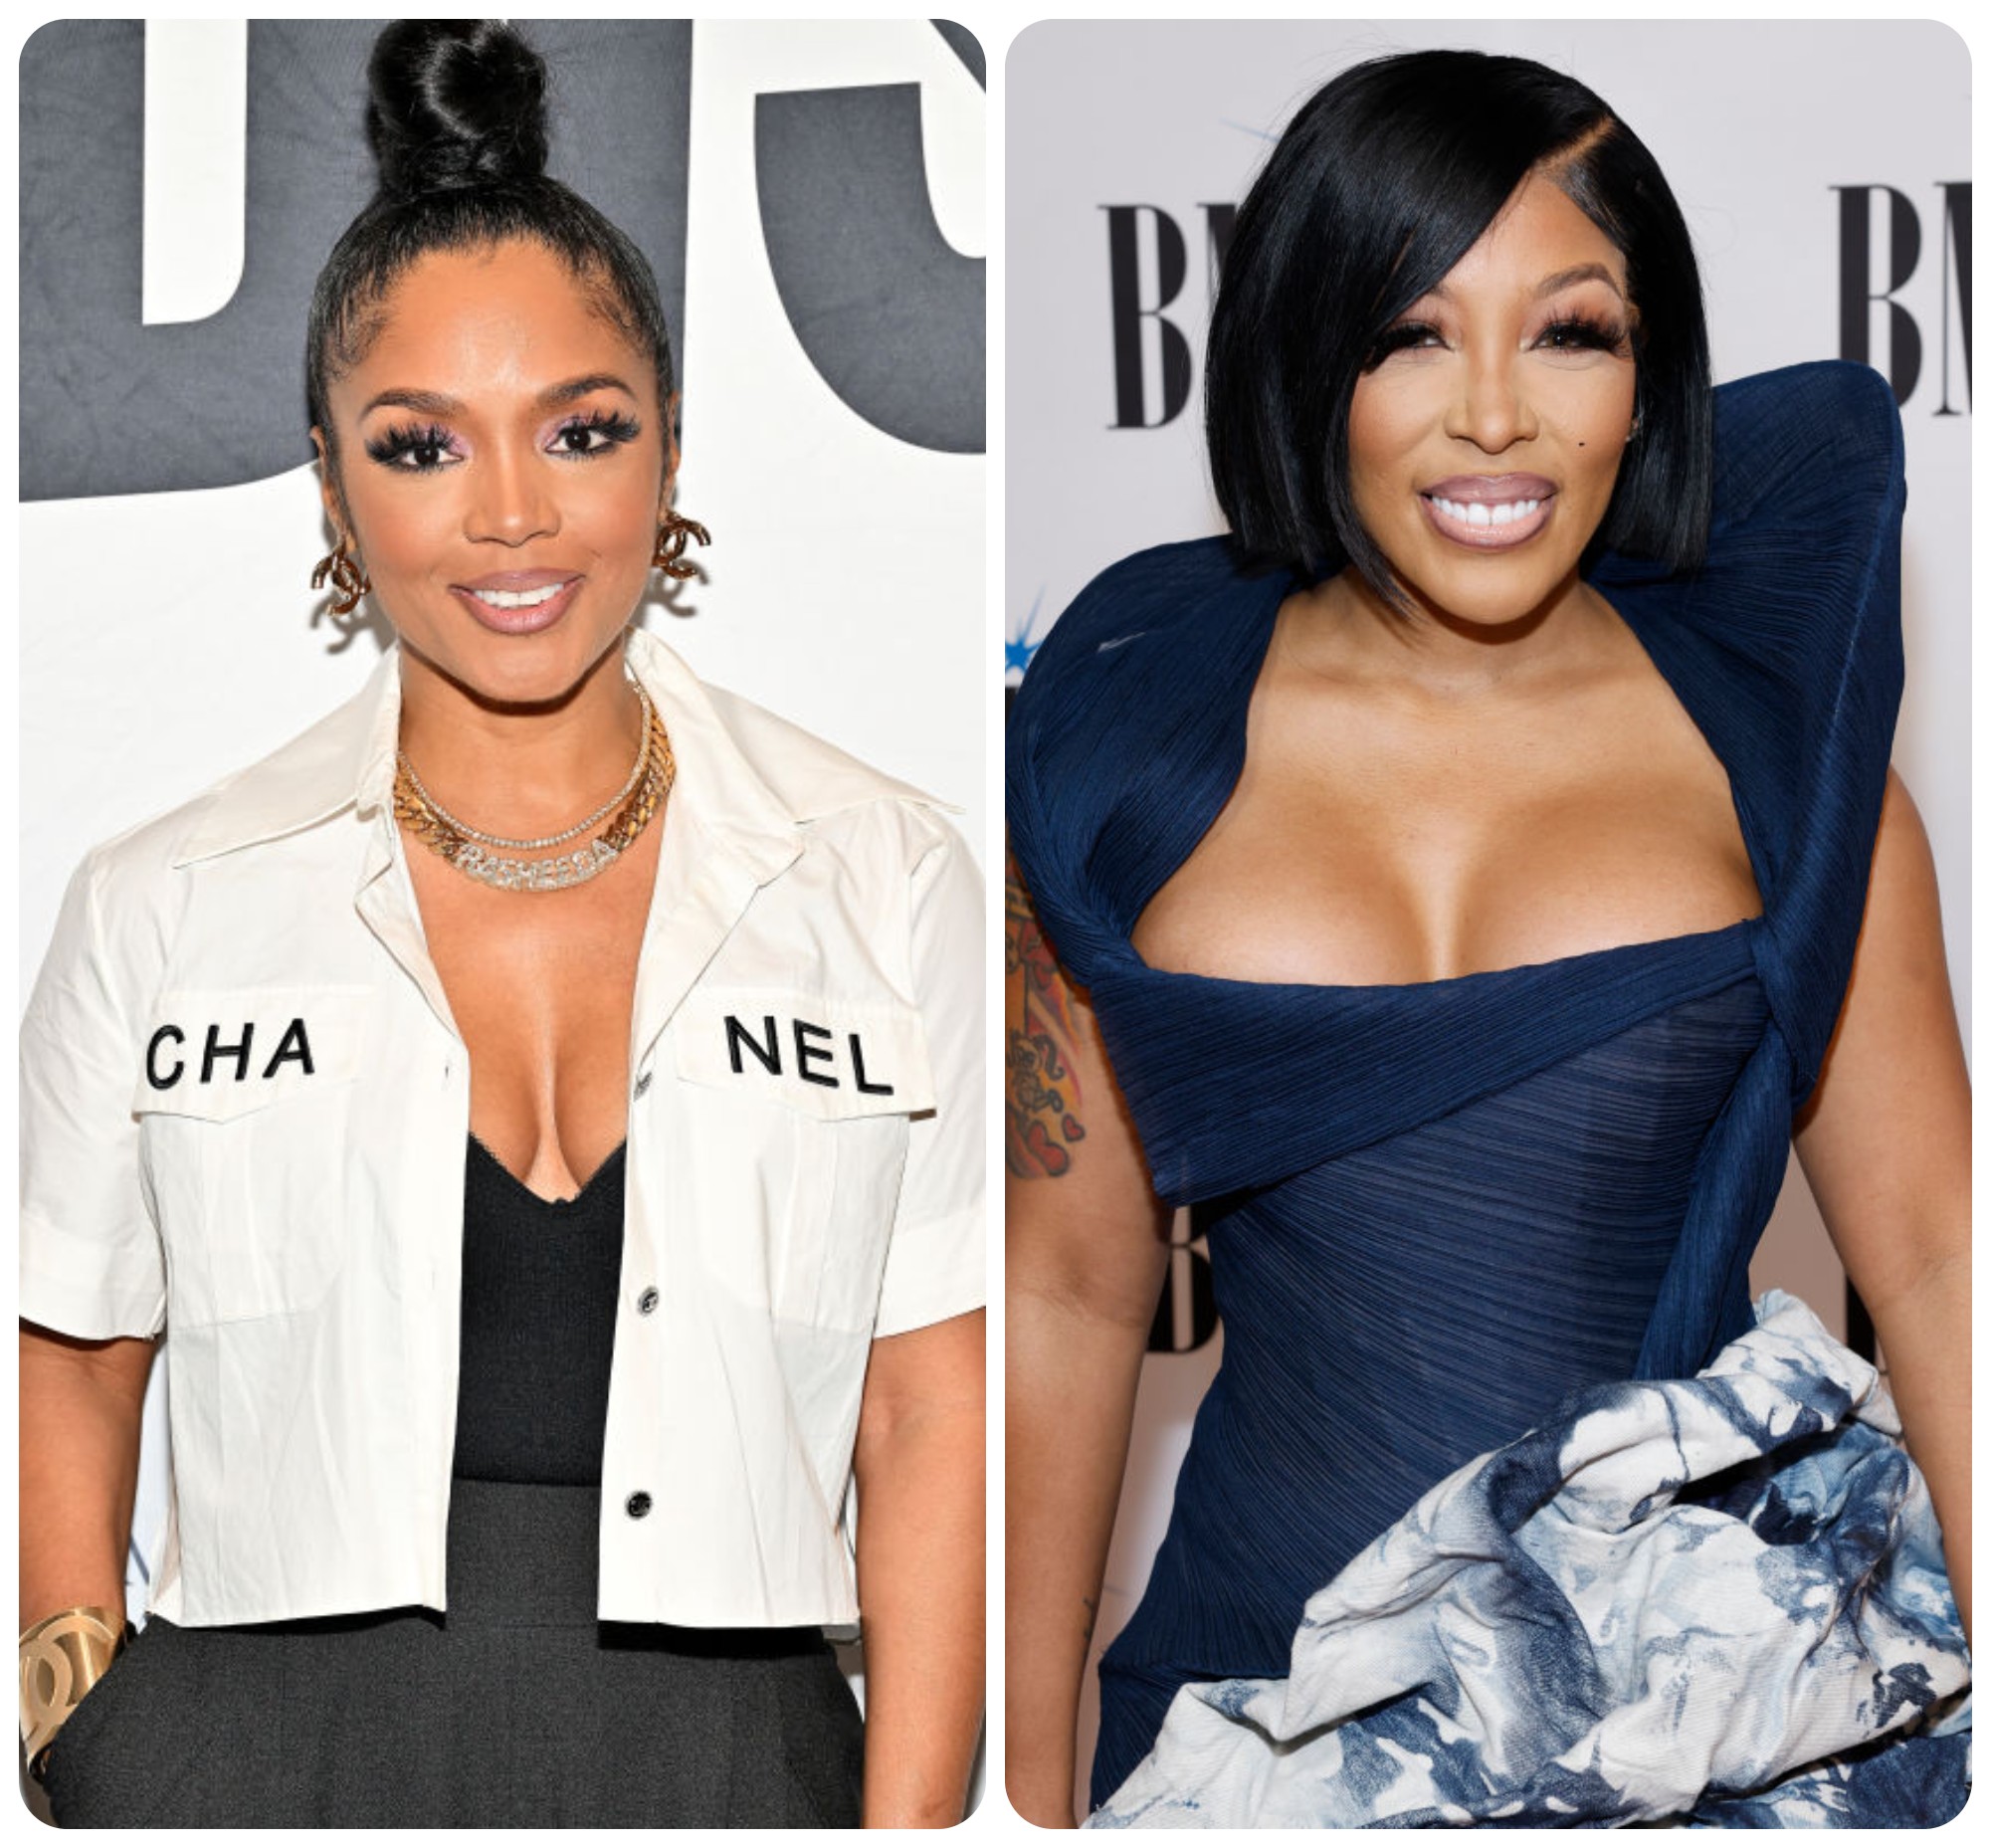 Rasheeda Says She Apologized To ‘That Young Lady’ K.Michelle Years Ago For Not Believing Her Memphitz Abuse Allegations